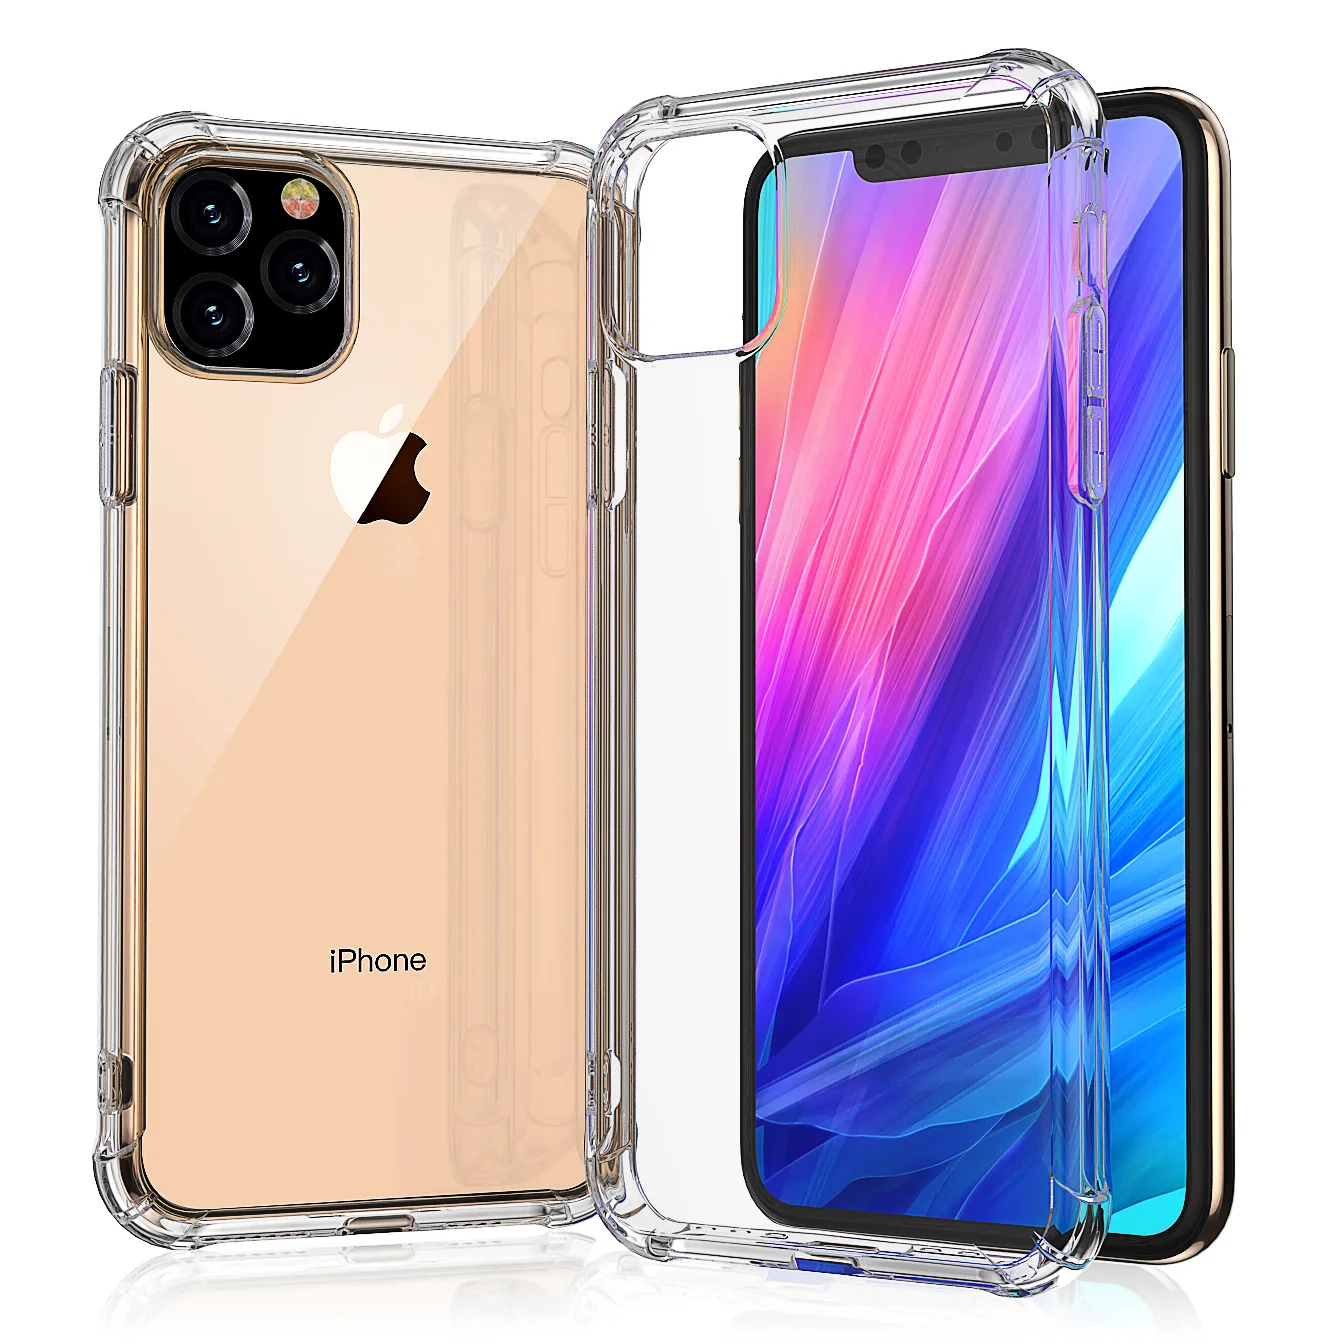 Vanding etage børste Wholesale Cheap Mobile Phones Accessories Shell 1.5mm Transparent Tpu Cell  Phone Case For Iphone 11 Pro Max - Buy Mobile Phones Accessories Shell,Cheap  Phone Case,Mobile Case Cover Product on Alibaba.com